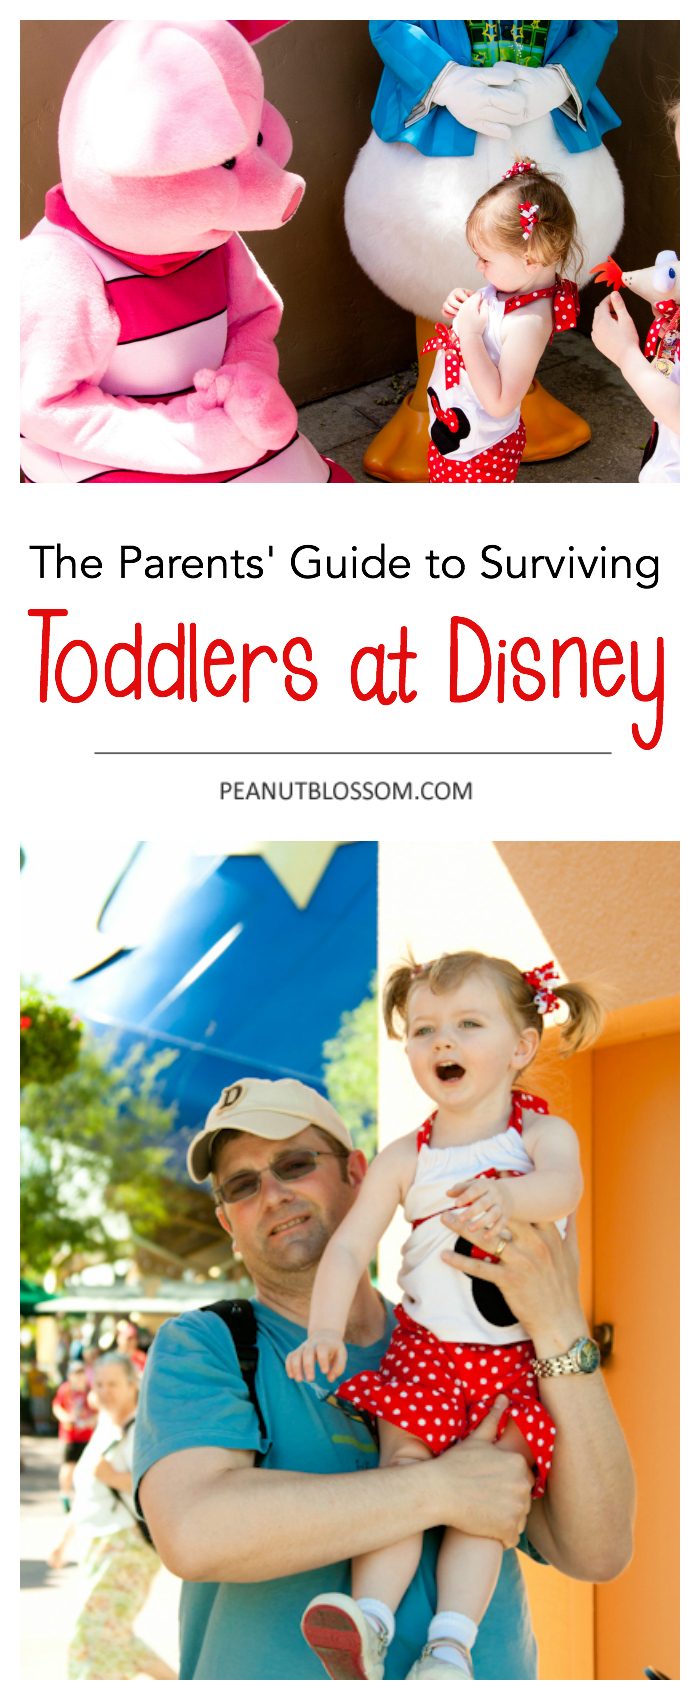 Parents' Guide to Surviving a Toddler at Disney